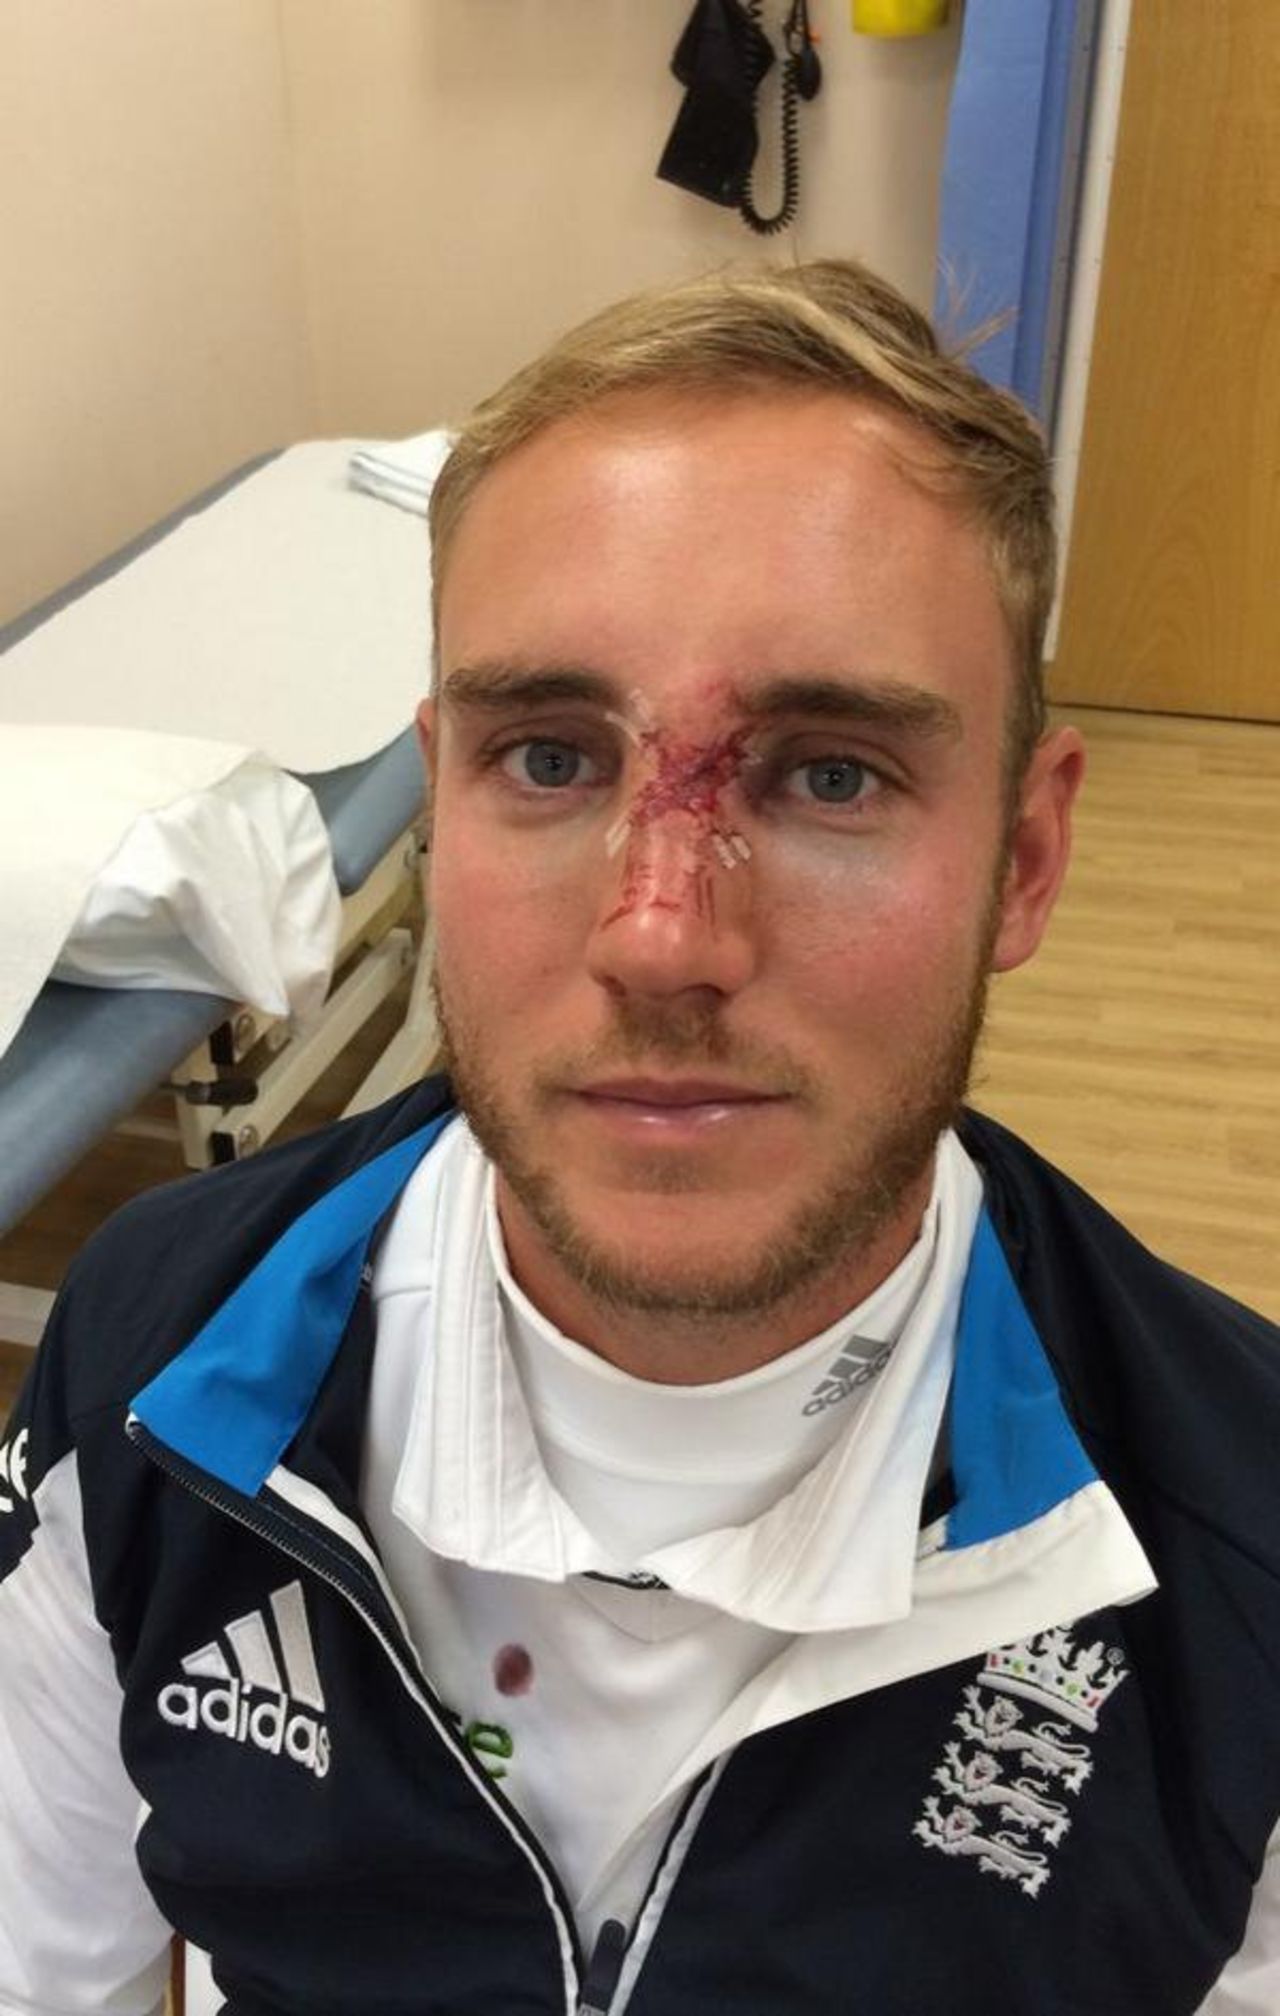 Stuart Broad shows the results of his blow in the face, England v India, 4th Investec Test, Old Trafford, August 9, 2014